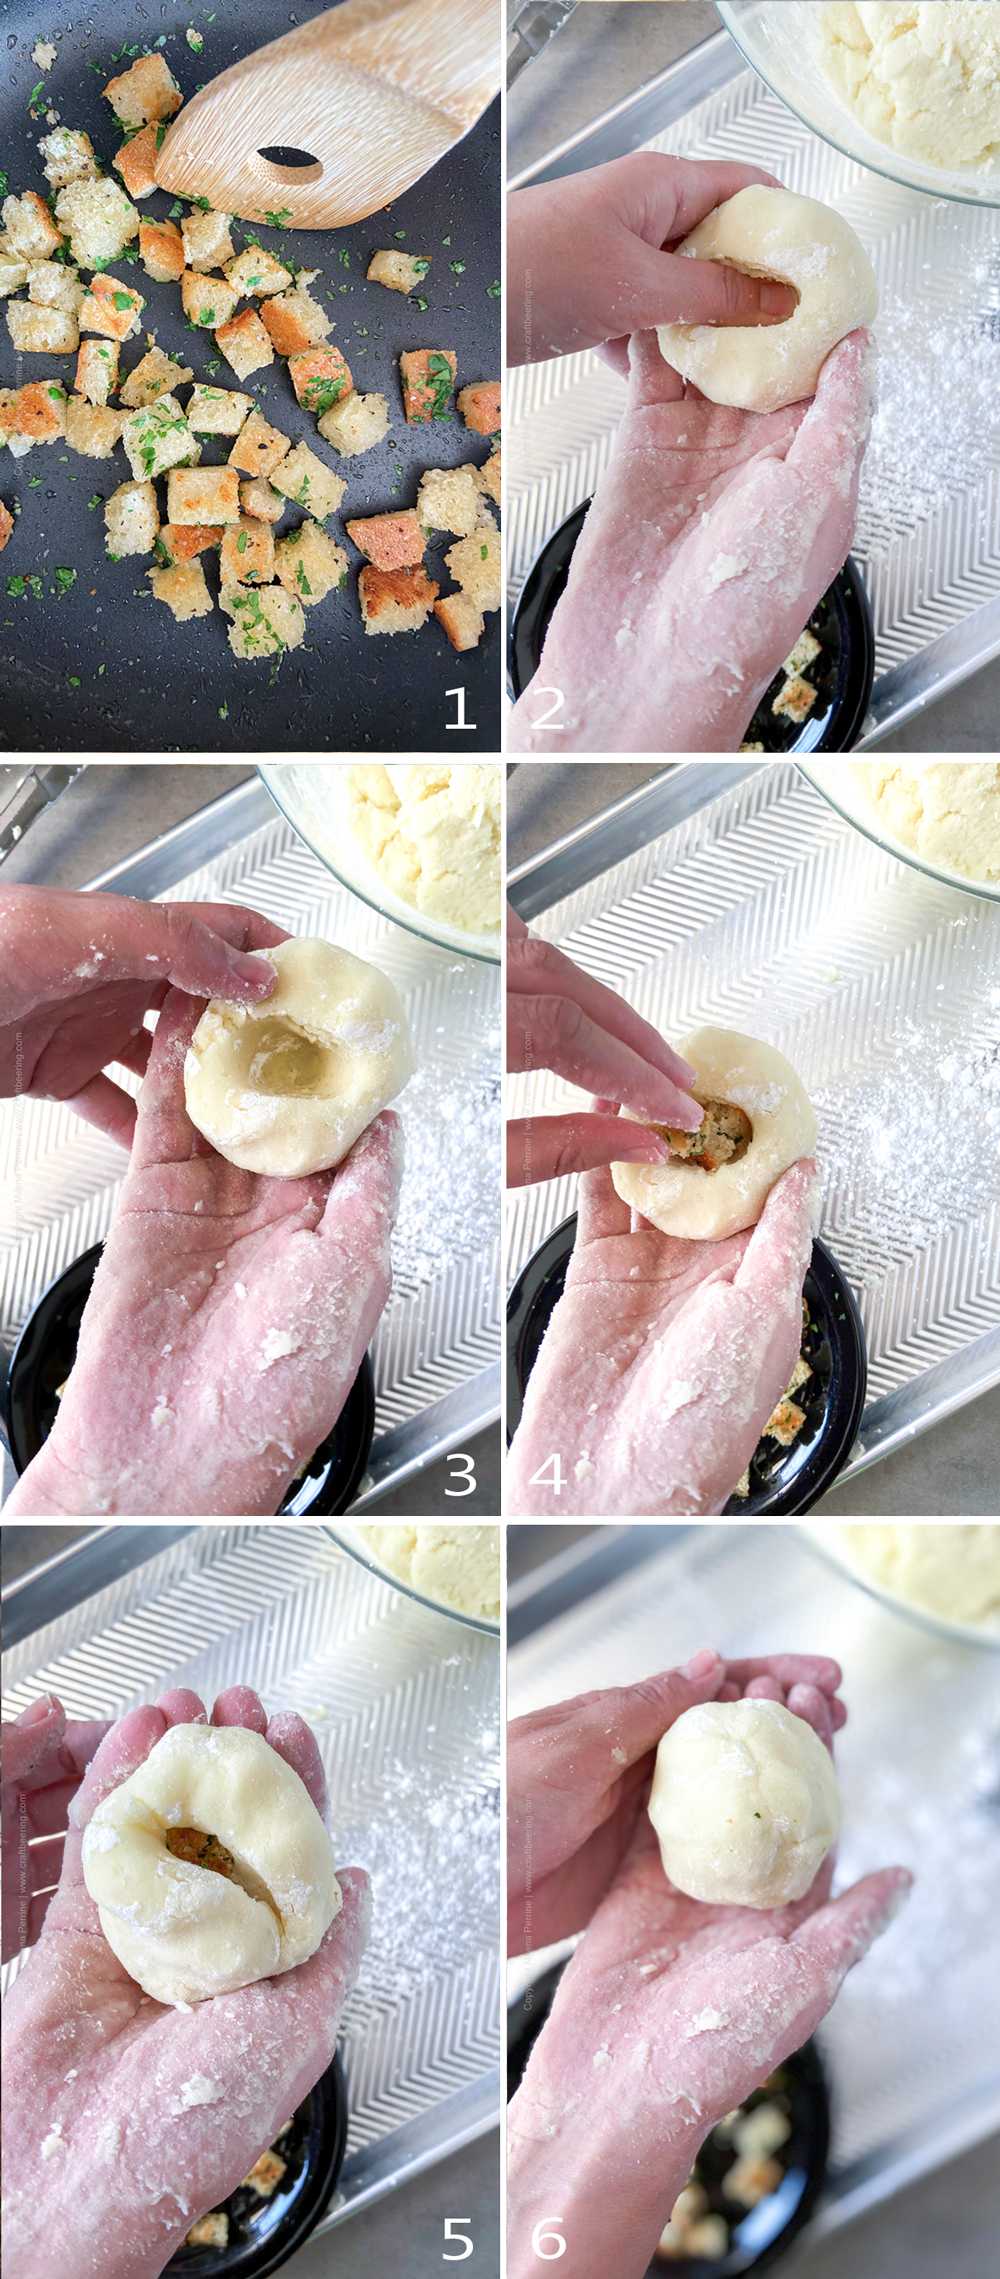 Image collage with steps on how to make bread crouton filling and stuff potato dumplings with it.